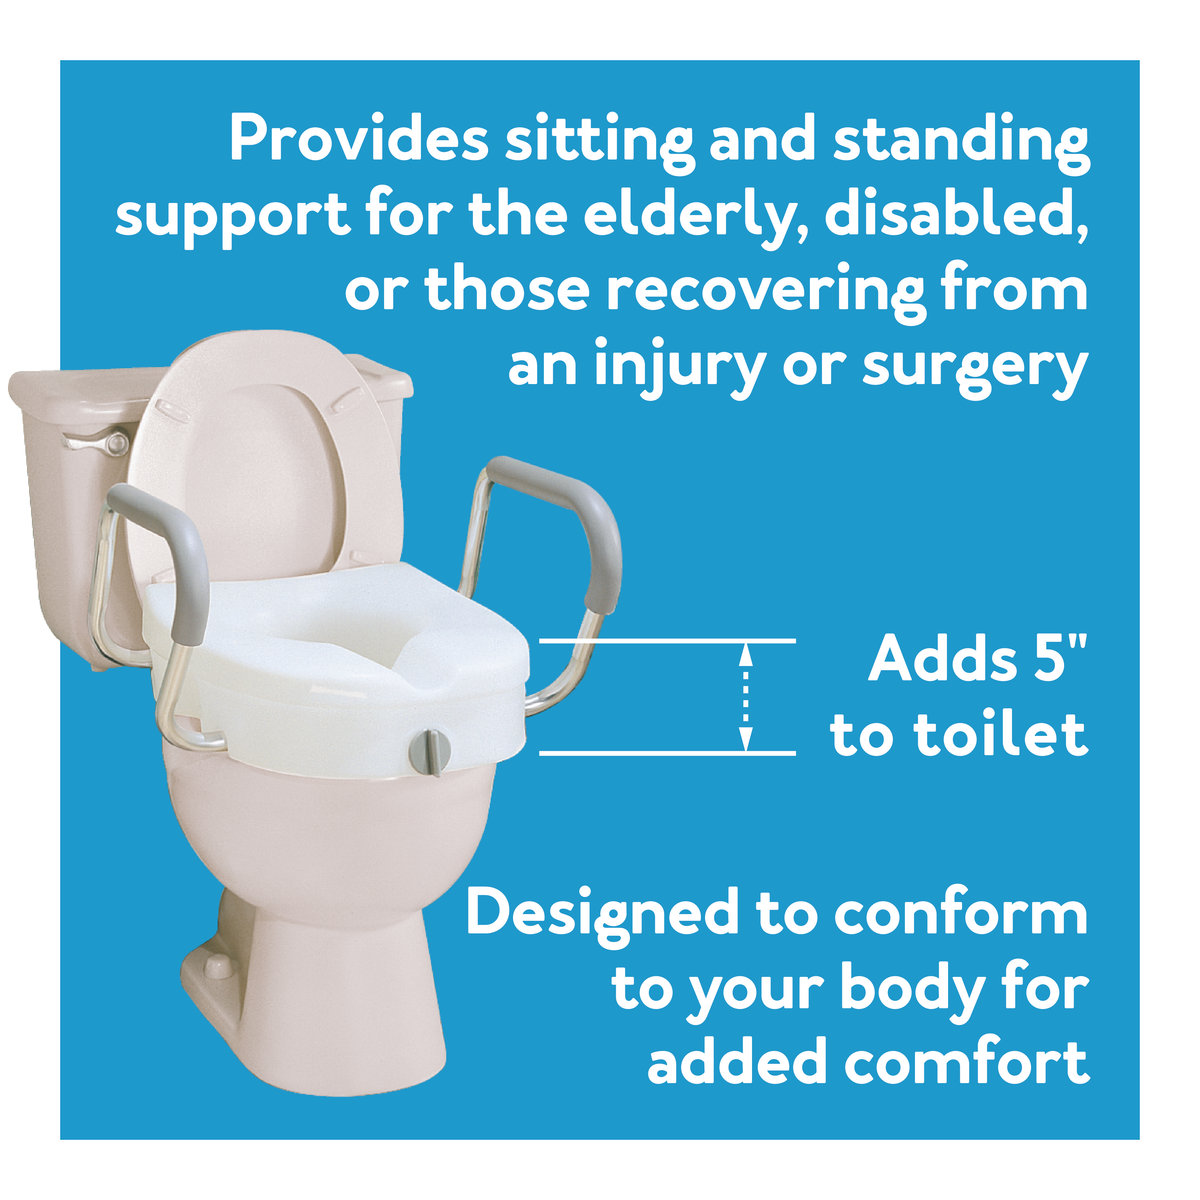 Carex E-Z Raised Toilet Seat on blue bg. Provides sitting/standing support, adds 5 inches to toilet, conforms to body.